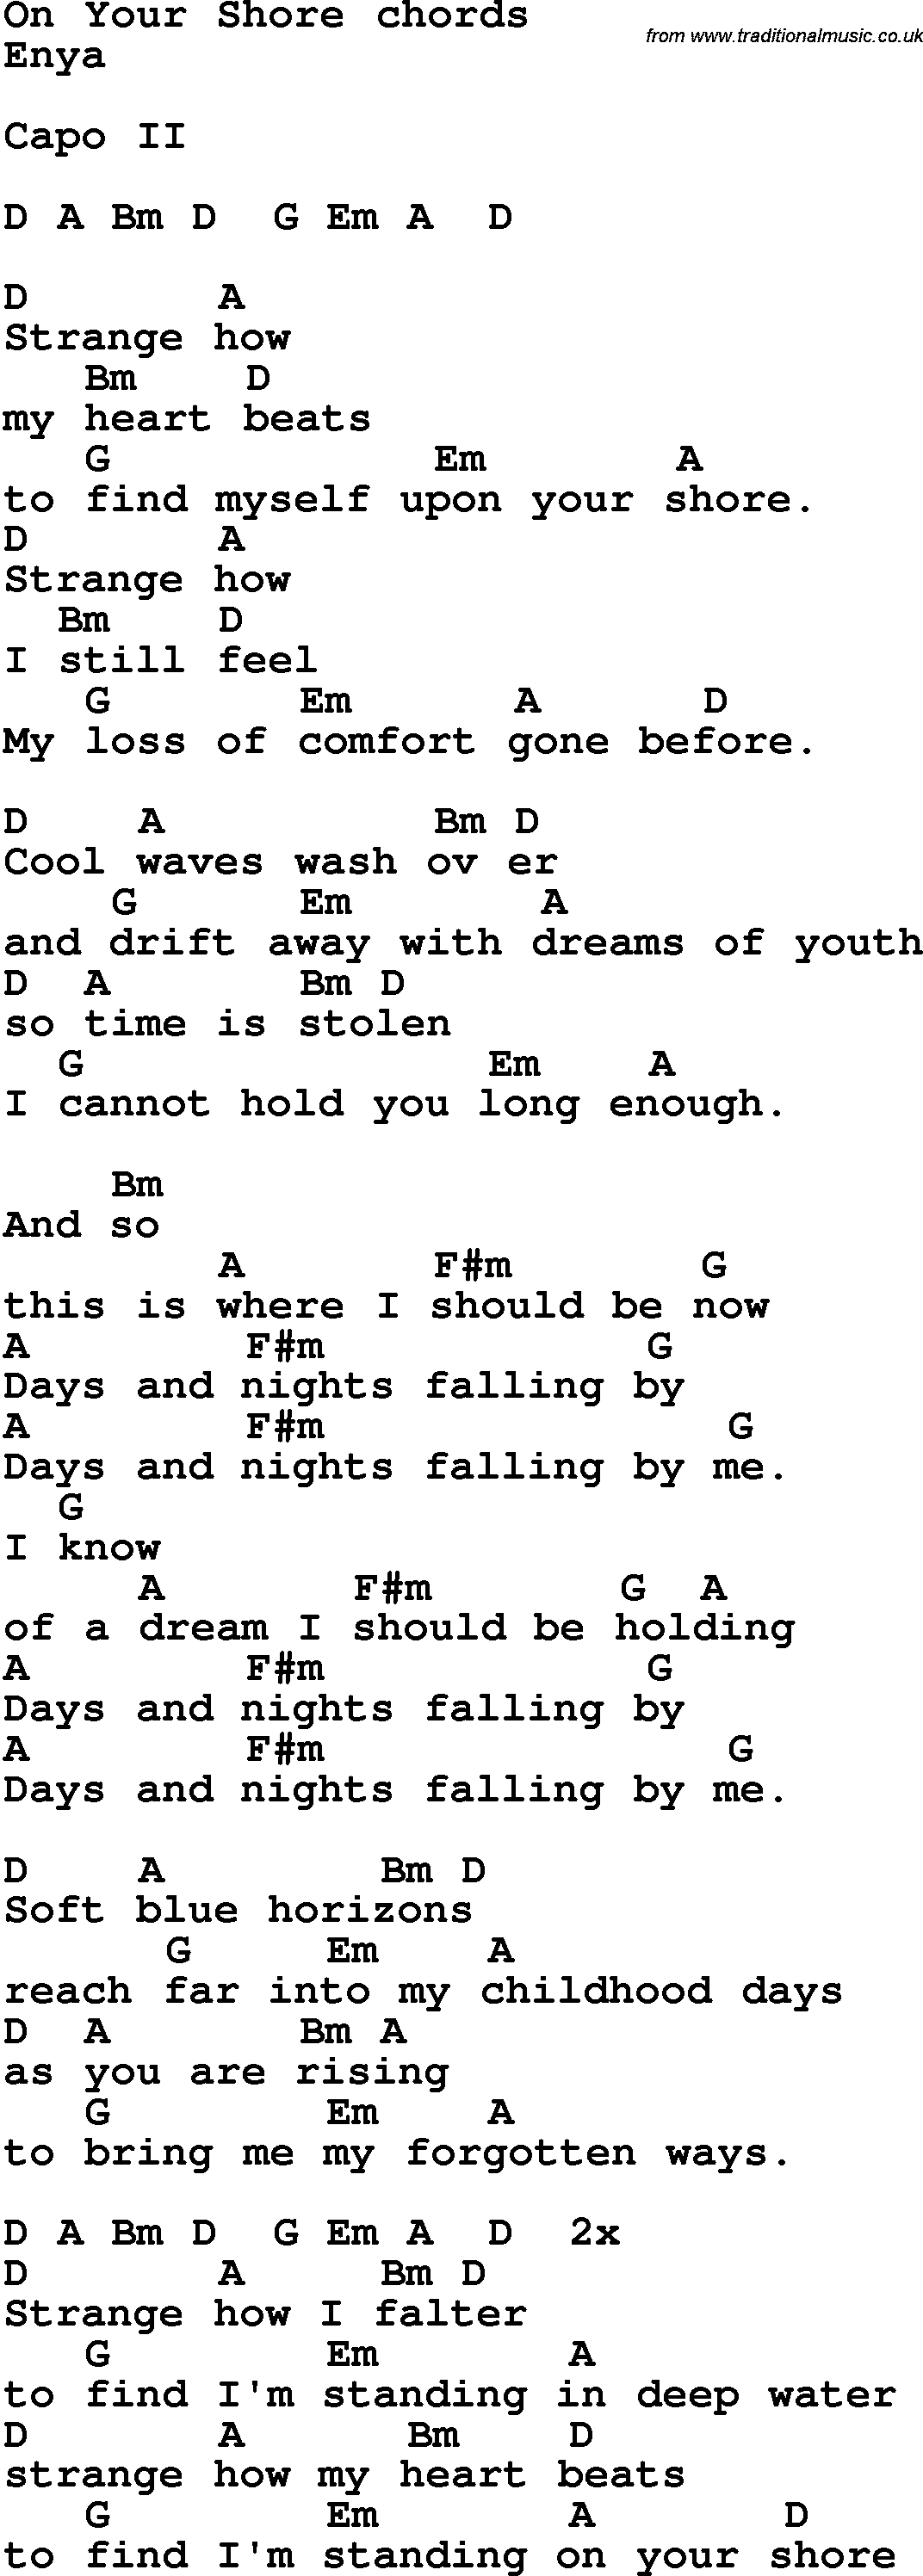 Song Lyrics with guitar chords for On Your Shore